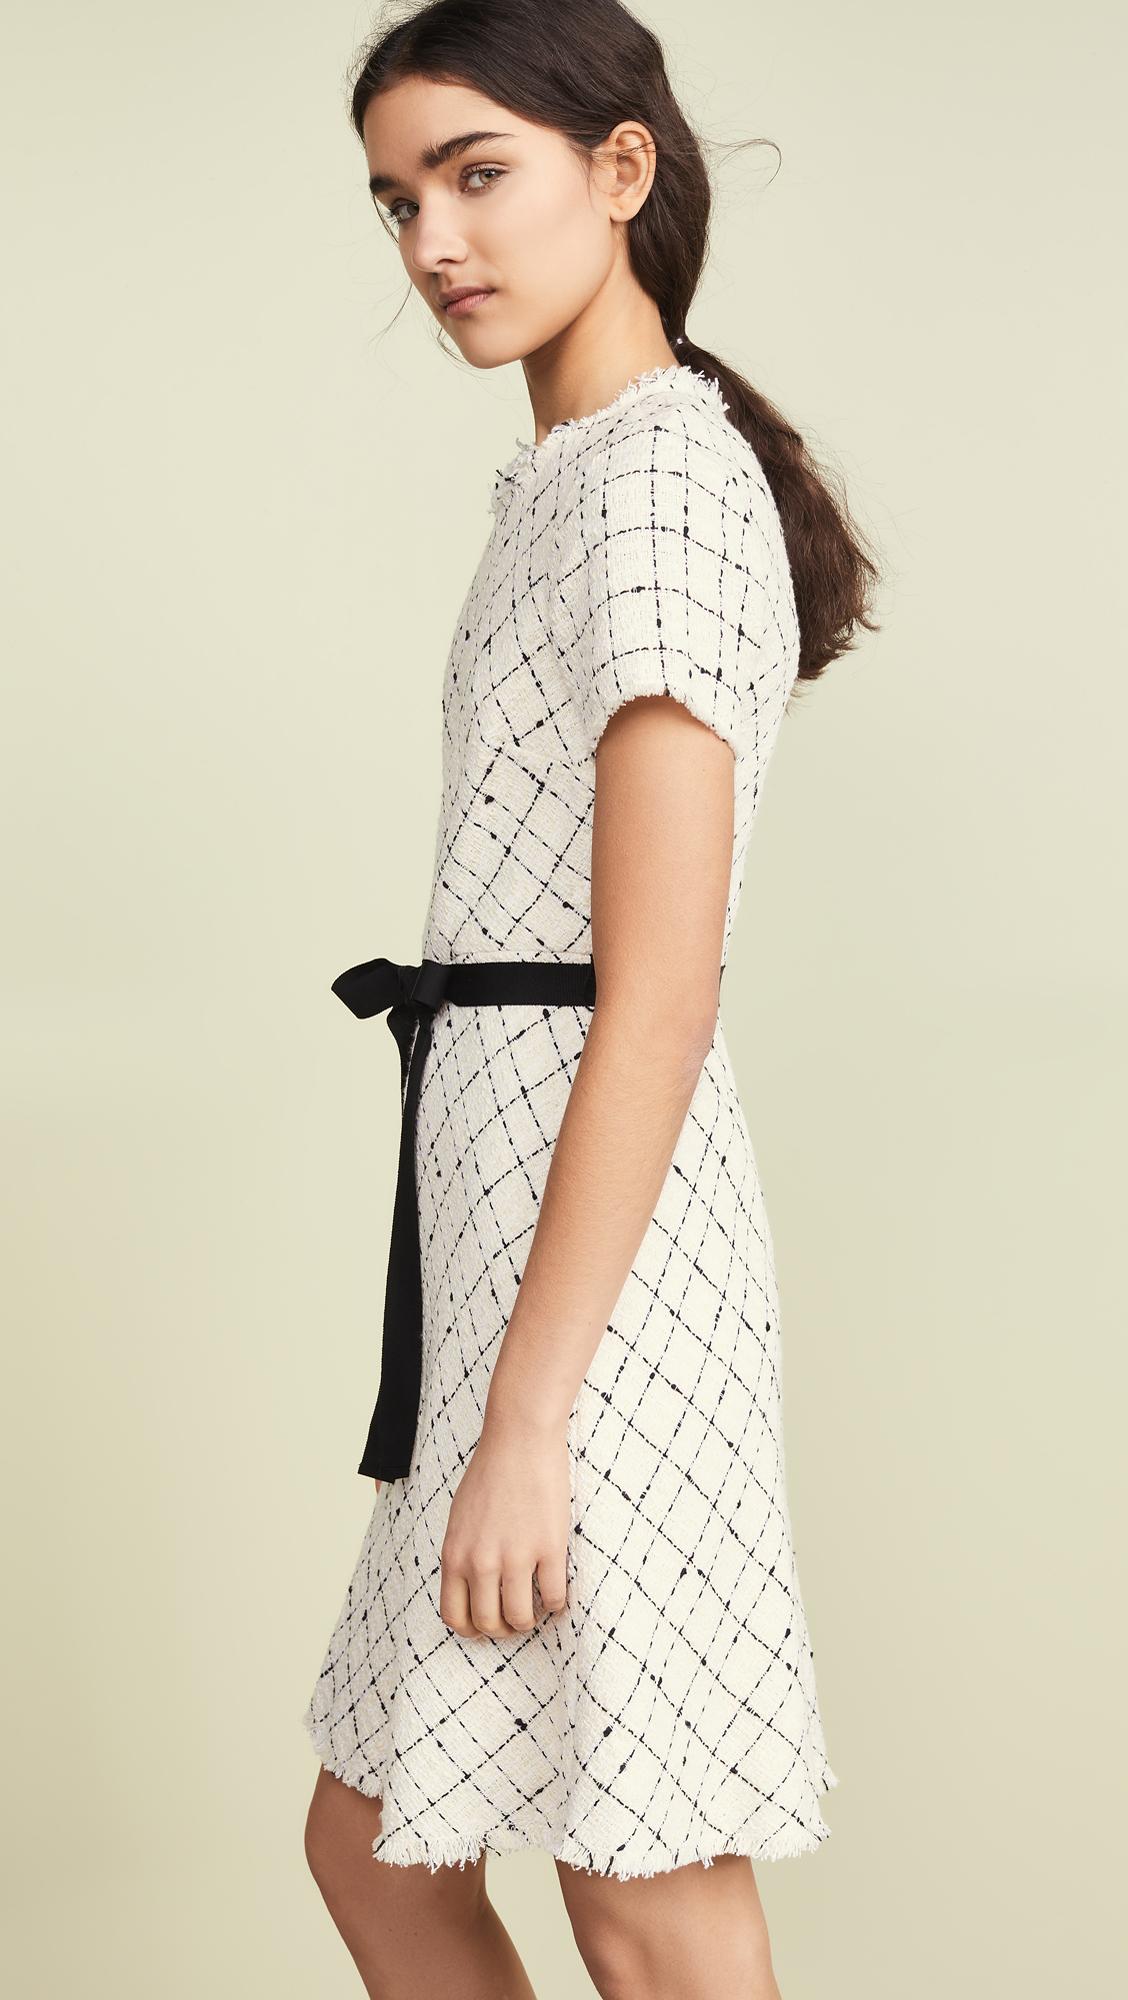 Lyst - Rebecca Taylor Short Sleeve Plaid Tweed Dress in Natural